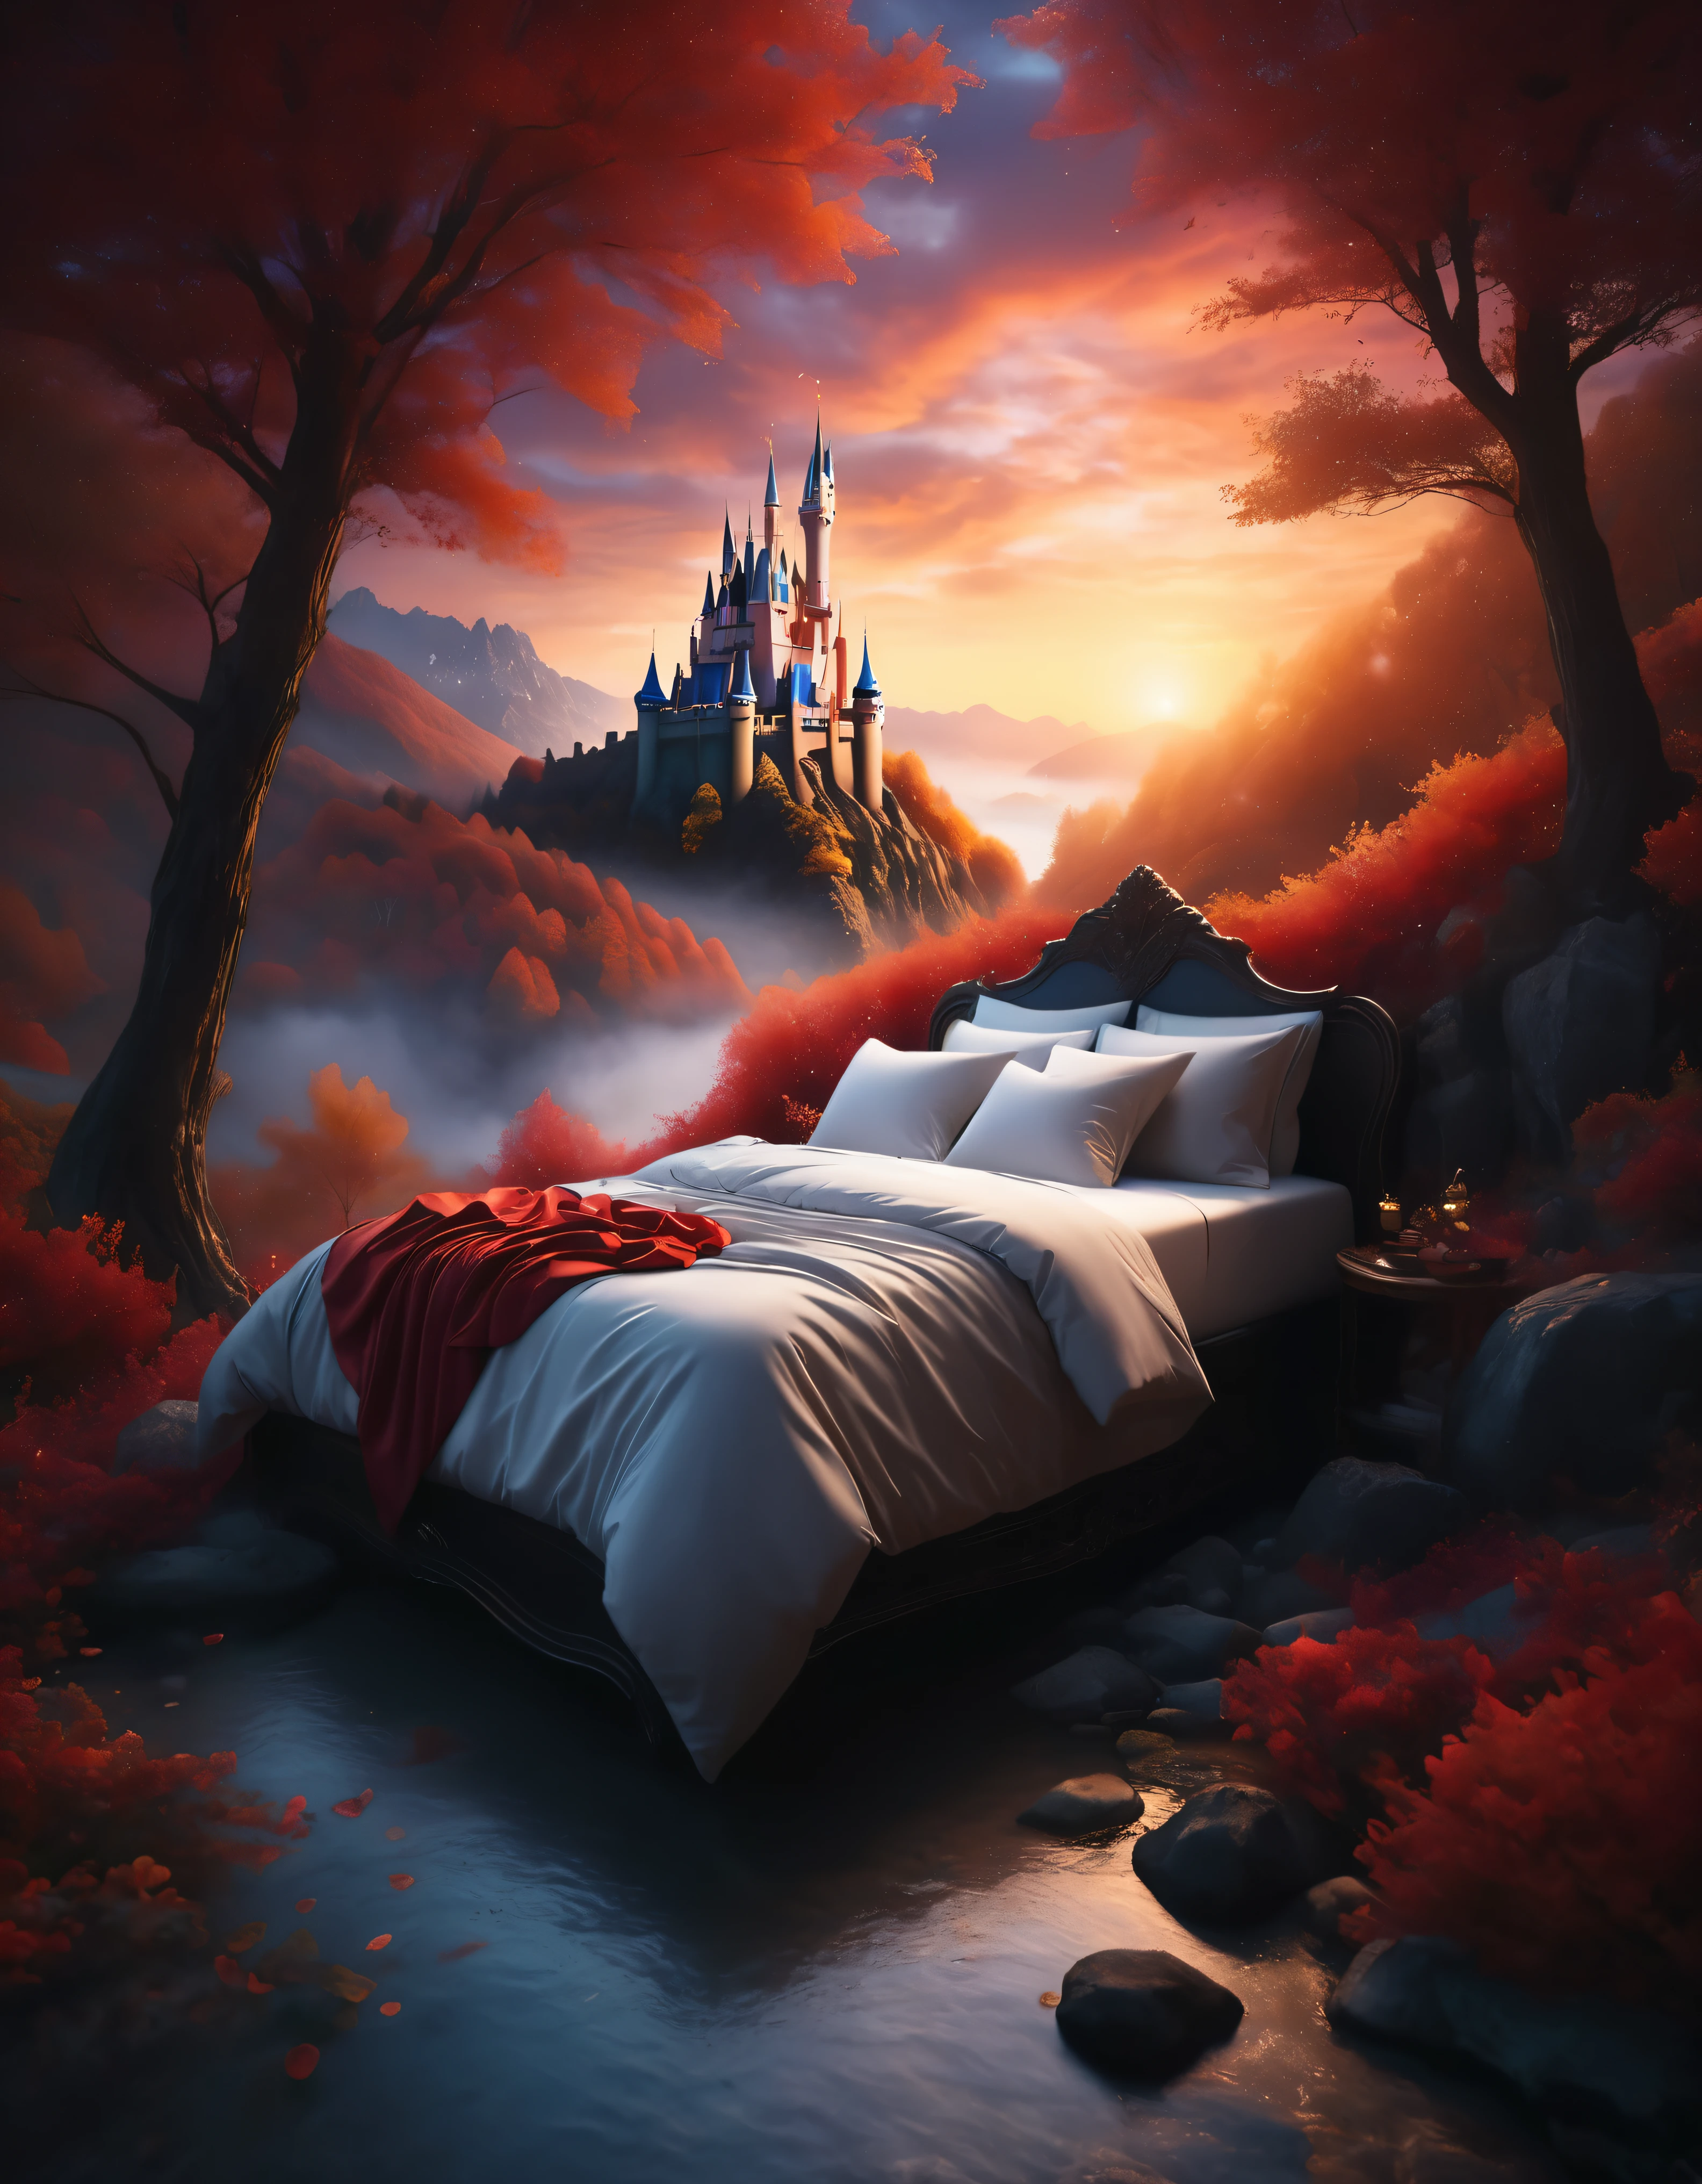 ((Masterpiece in maximum 16K resolution):1.6),((soft_color_photograpy:)1.5), ((Ultra-Detailed):1.4),((Movie-like still images and dynamic angles):1.3) | (double contact:1.3), Beautiful dream castle silhouette effect, Superimposed on Sleeping Beauty,《Sleeping Beauty Theme》, ((Sleeping beauty dream castle):1.5), Oil and ink on canvas, fine art, super dramatic light, photoillustration, amazing depth, the ultra-detailed, iridescent red, superfluous dreams, intricately details, amazing depth, Amazing atmosphere, Mesmerizing whimsical vibrant landscapes, Maximalism (beautiful outside, Ugly inside, pressure and pain, beauty and despair, hard and soft, positive and negative, hot and cold, Sweet and sour, Vibrant but boring, Perfect harmony, light and shadows, hot and cold, old and young, Fire and ice, Yin and yang, australian, Black and white, hot and cold, organic and mechanical, Corresponding color, loud and quiet, Chaos and peace, day and night:1.2) The complex masterpiece of a real-time engineering leader. | Rendered in ultra-high definition with UHD and retina quality, this masterpiece ensures anatomical correctness and textured skin with super detail. With a focus on high quality and accuracy, this award-winning portrayal captures every nuance in stunning 16k resolution, immersing viewers in its lifelike depiction. | ((perfect_composition, perfect_design, perfect_layout, perfect_detail, ultra_detailed)), ((enhance_all, fix_everything)), More Detail, Enhance.